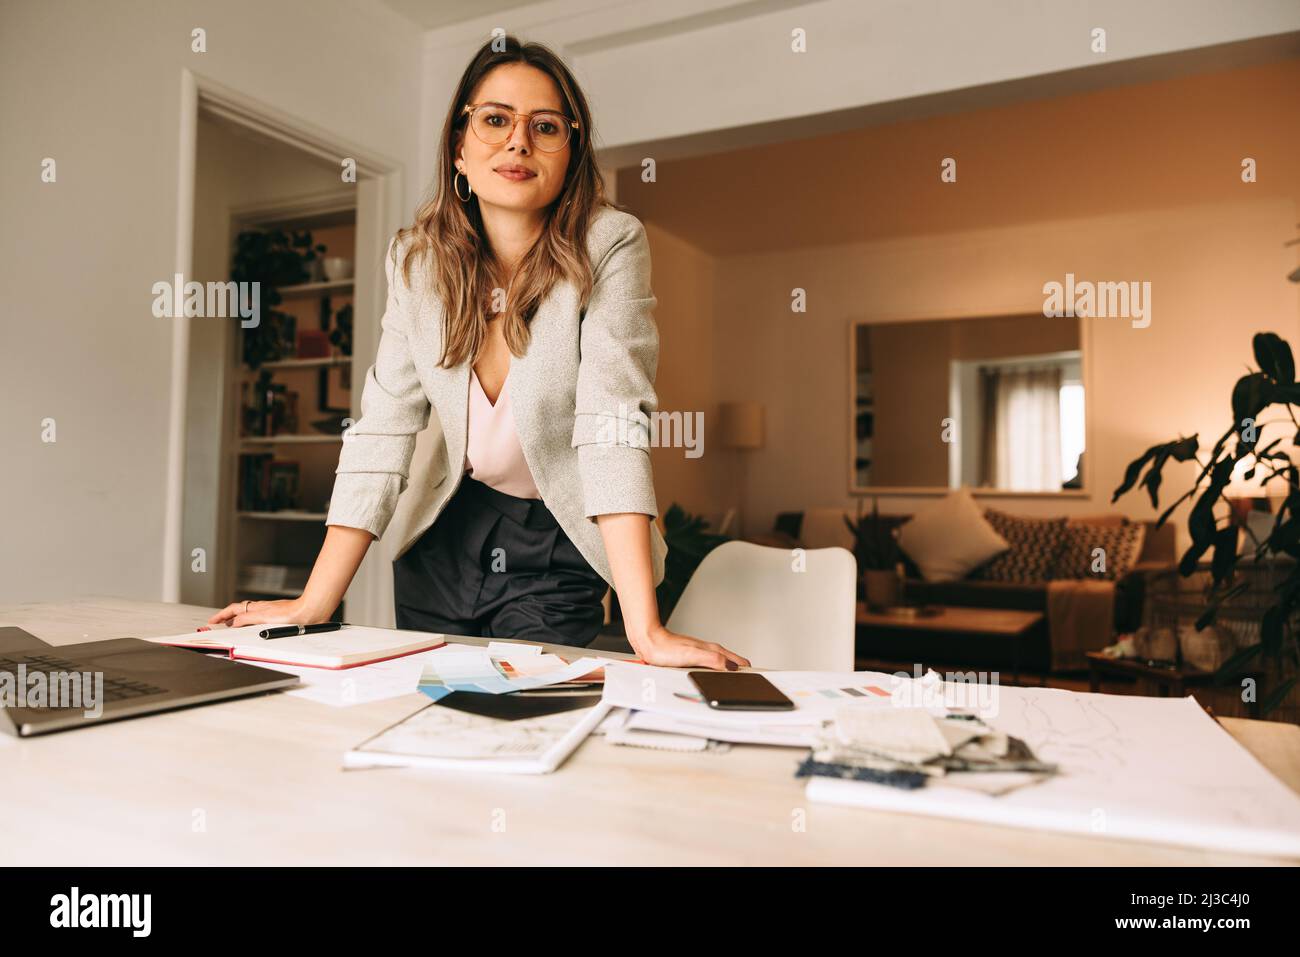 Professional designer working in her home office. Young businesswoman looking at the camera while standing behind her creative desk. Female designer p Stock Photo